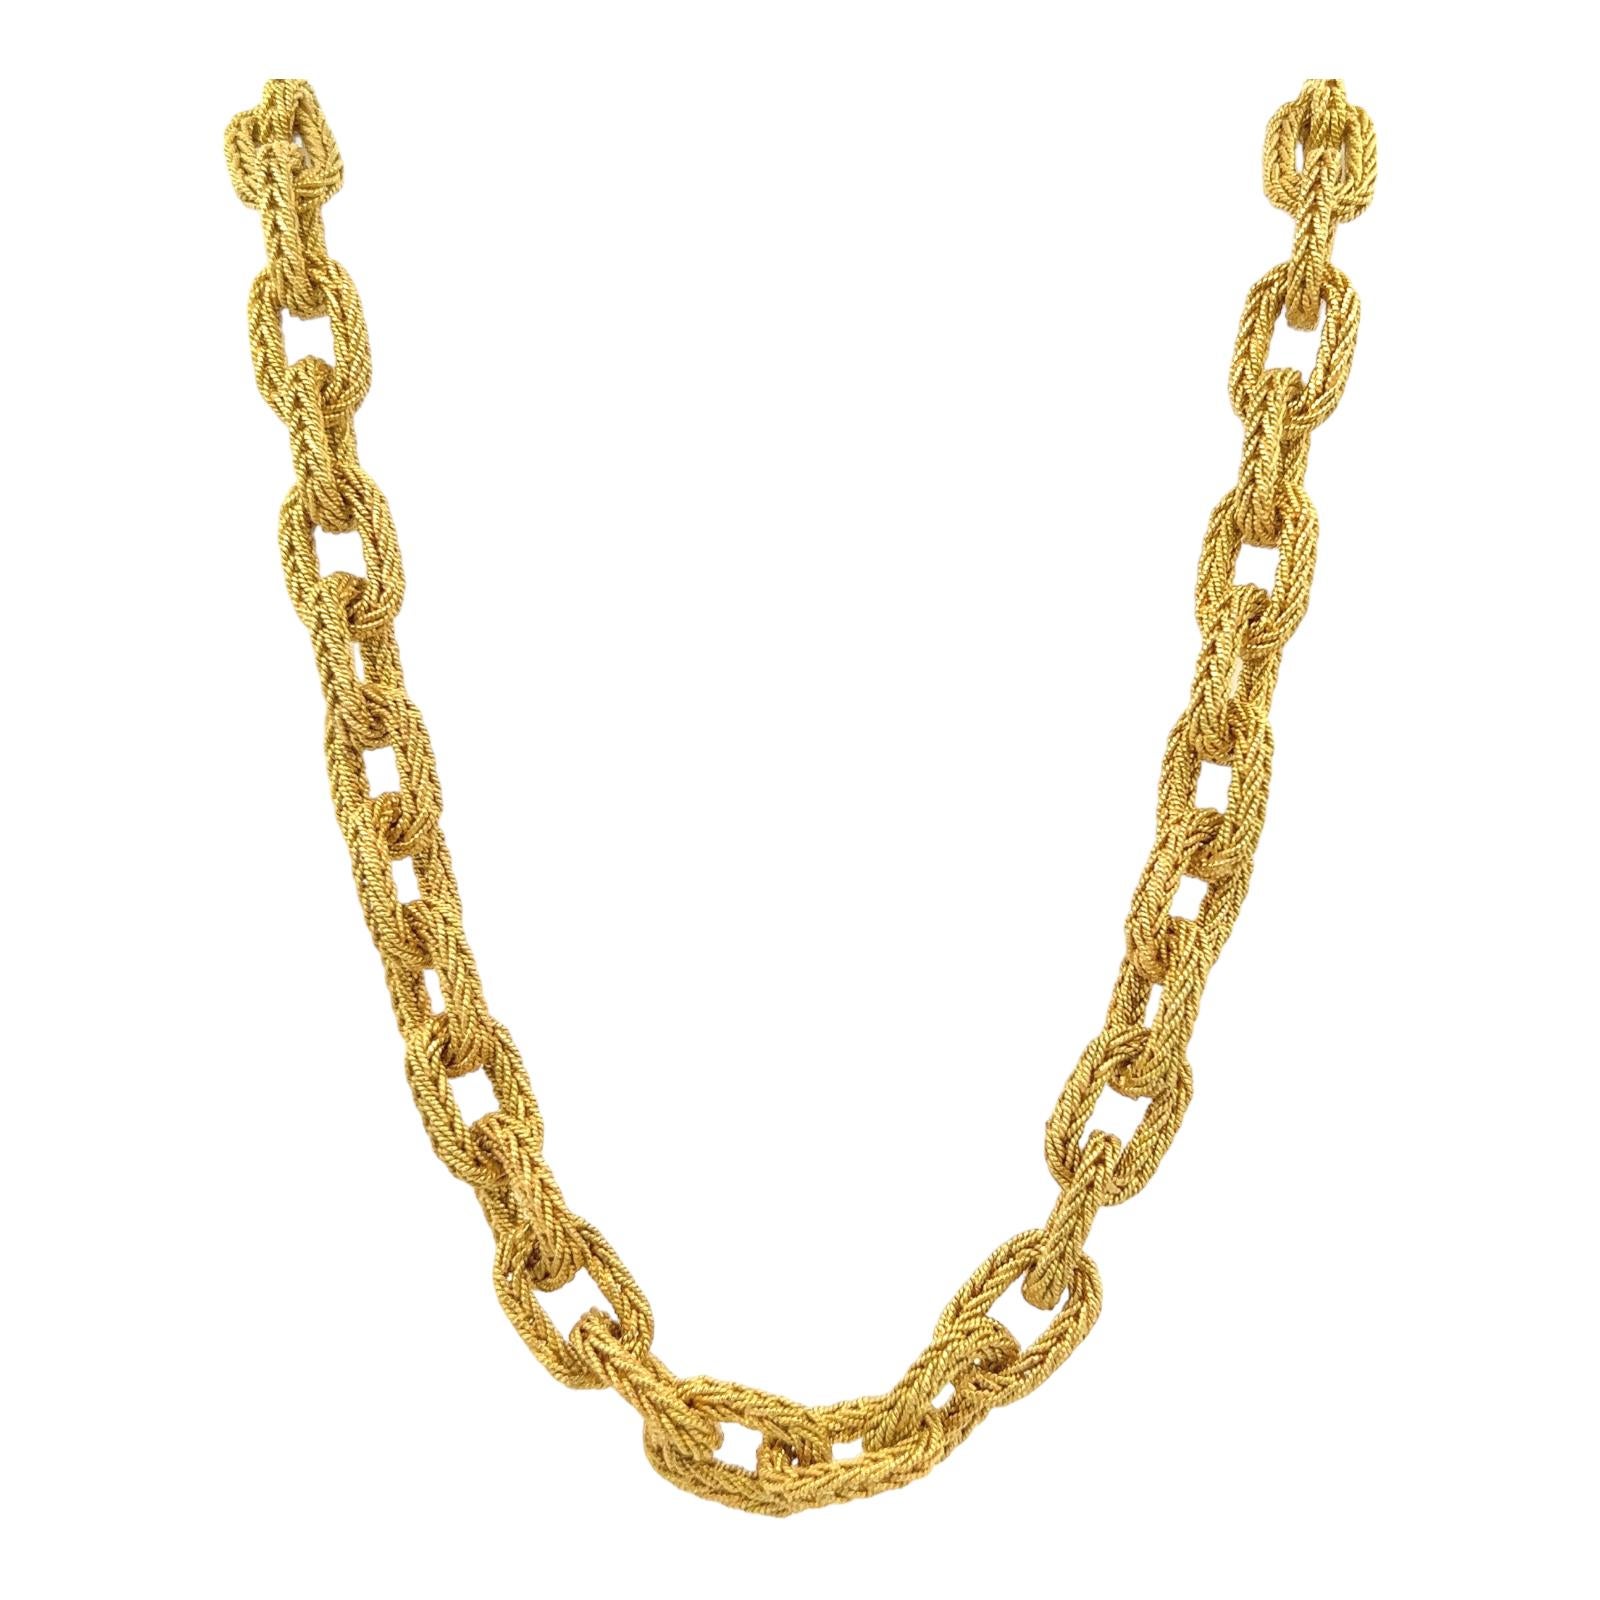 Beautifully crafted Italian link necklace crafted in 18 karat yellow gold. The textured oval link necklace measures 17 inches in length with a hidden clasp and safey. Stamped Italy 18K. 